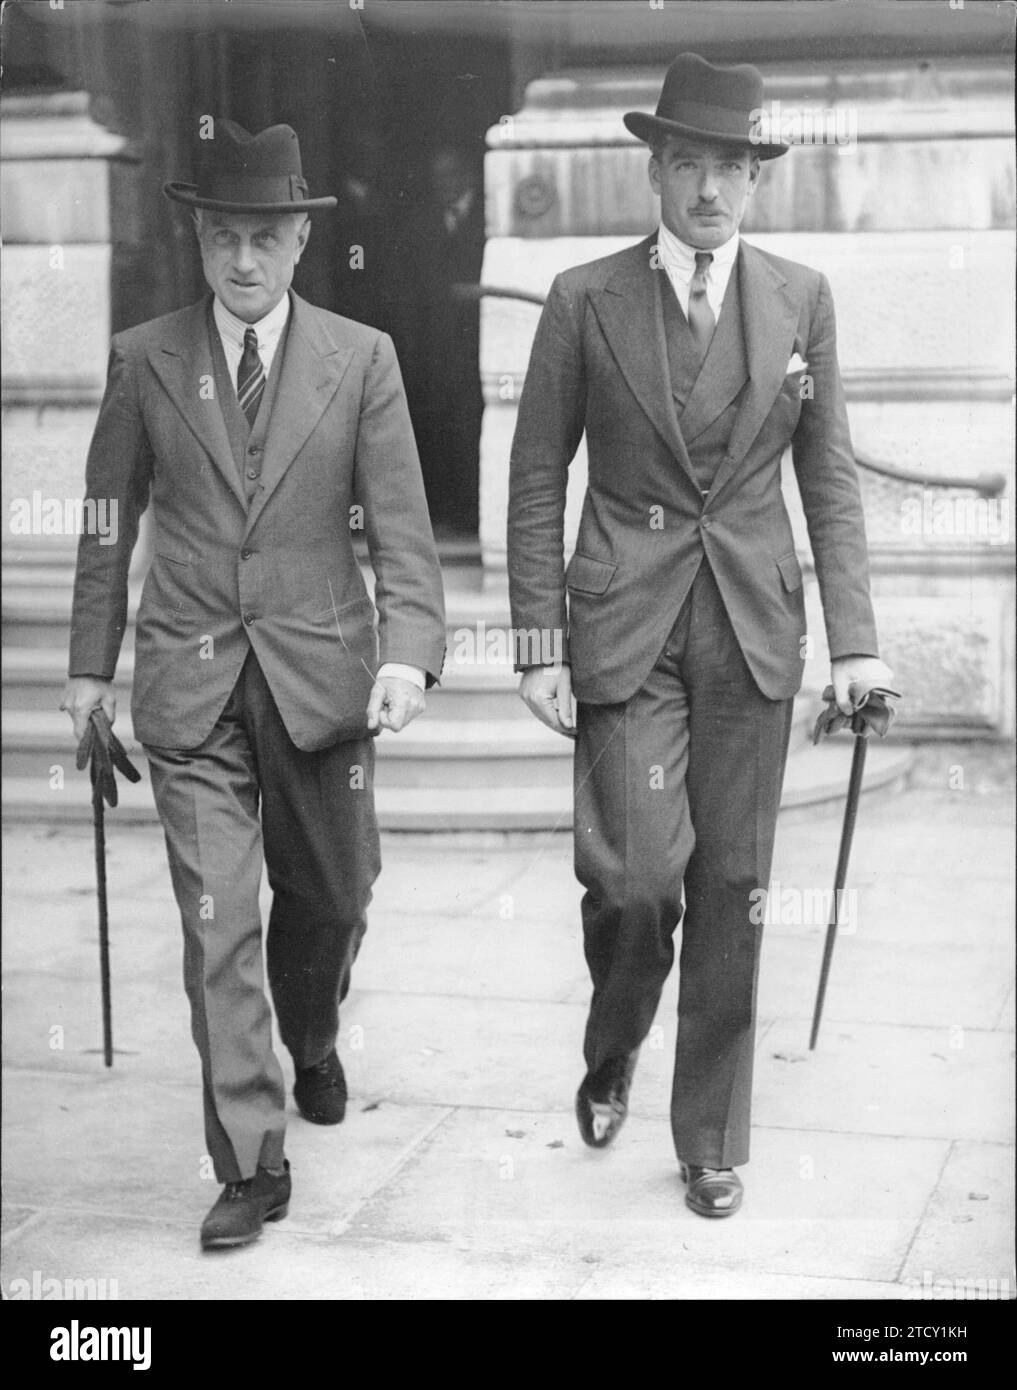 12/22/1935. On the right the Foreign Secretary of Great Britain, Anthony Eden, and on the left Samuel Hoare. Credit: Album / Archivo ABC Stock Photo